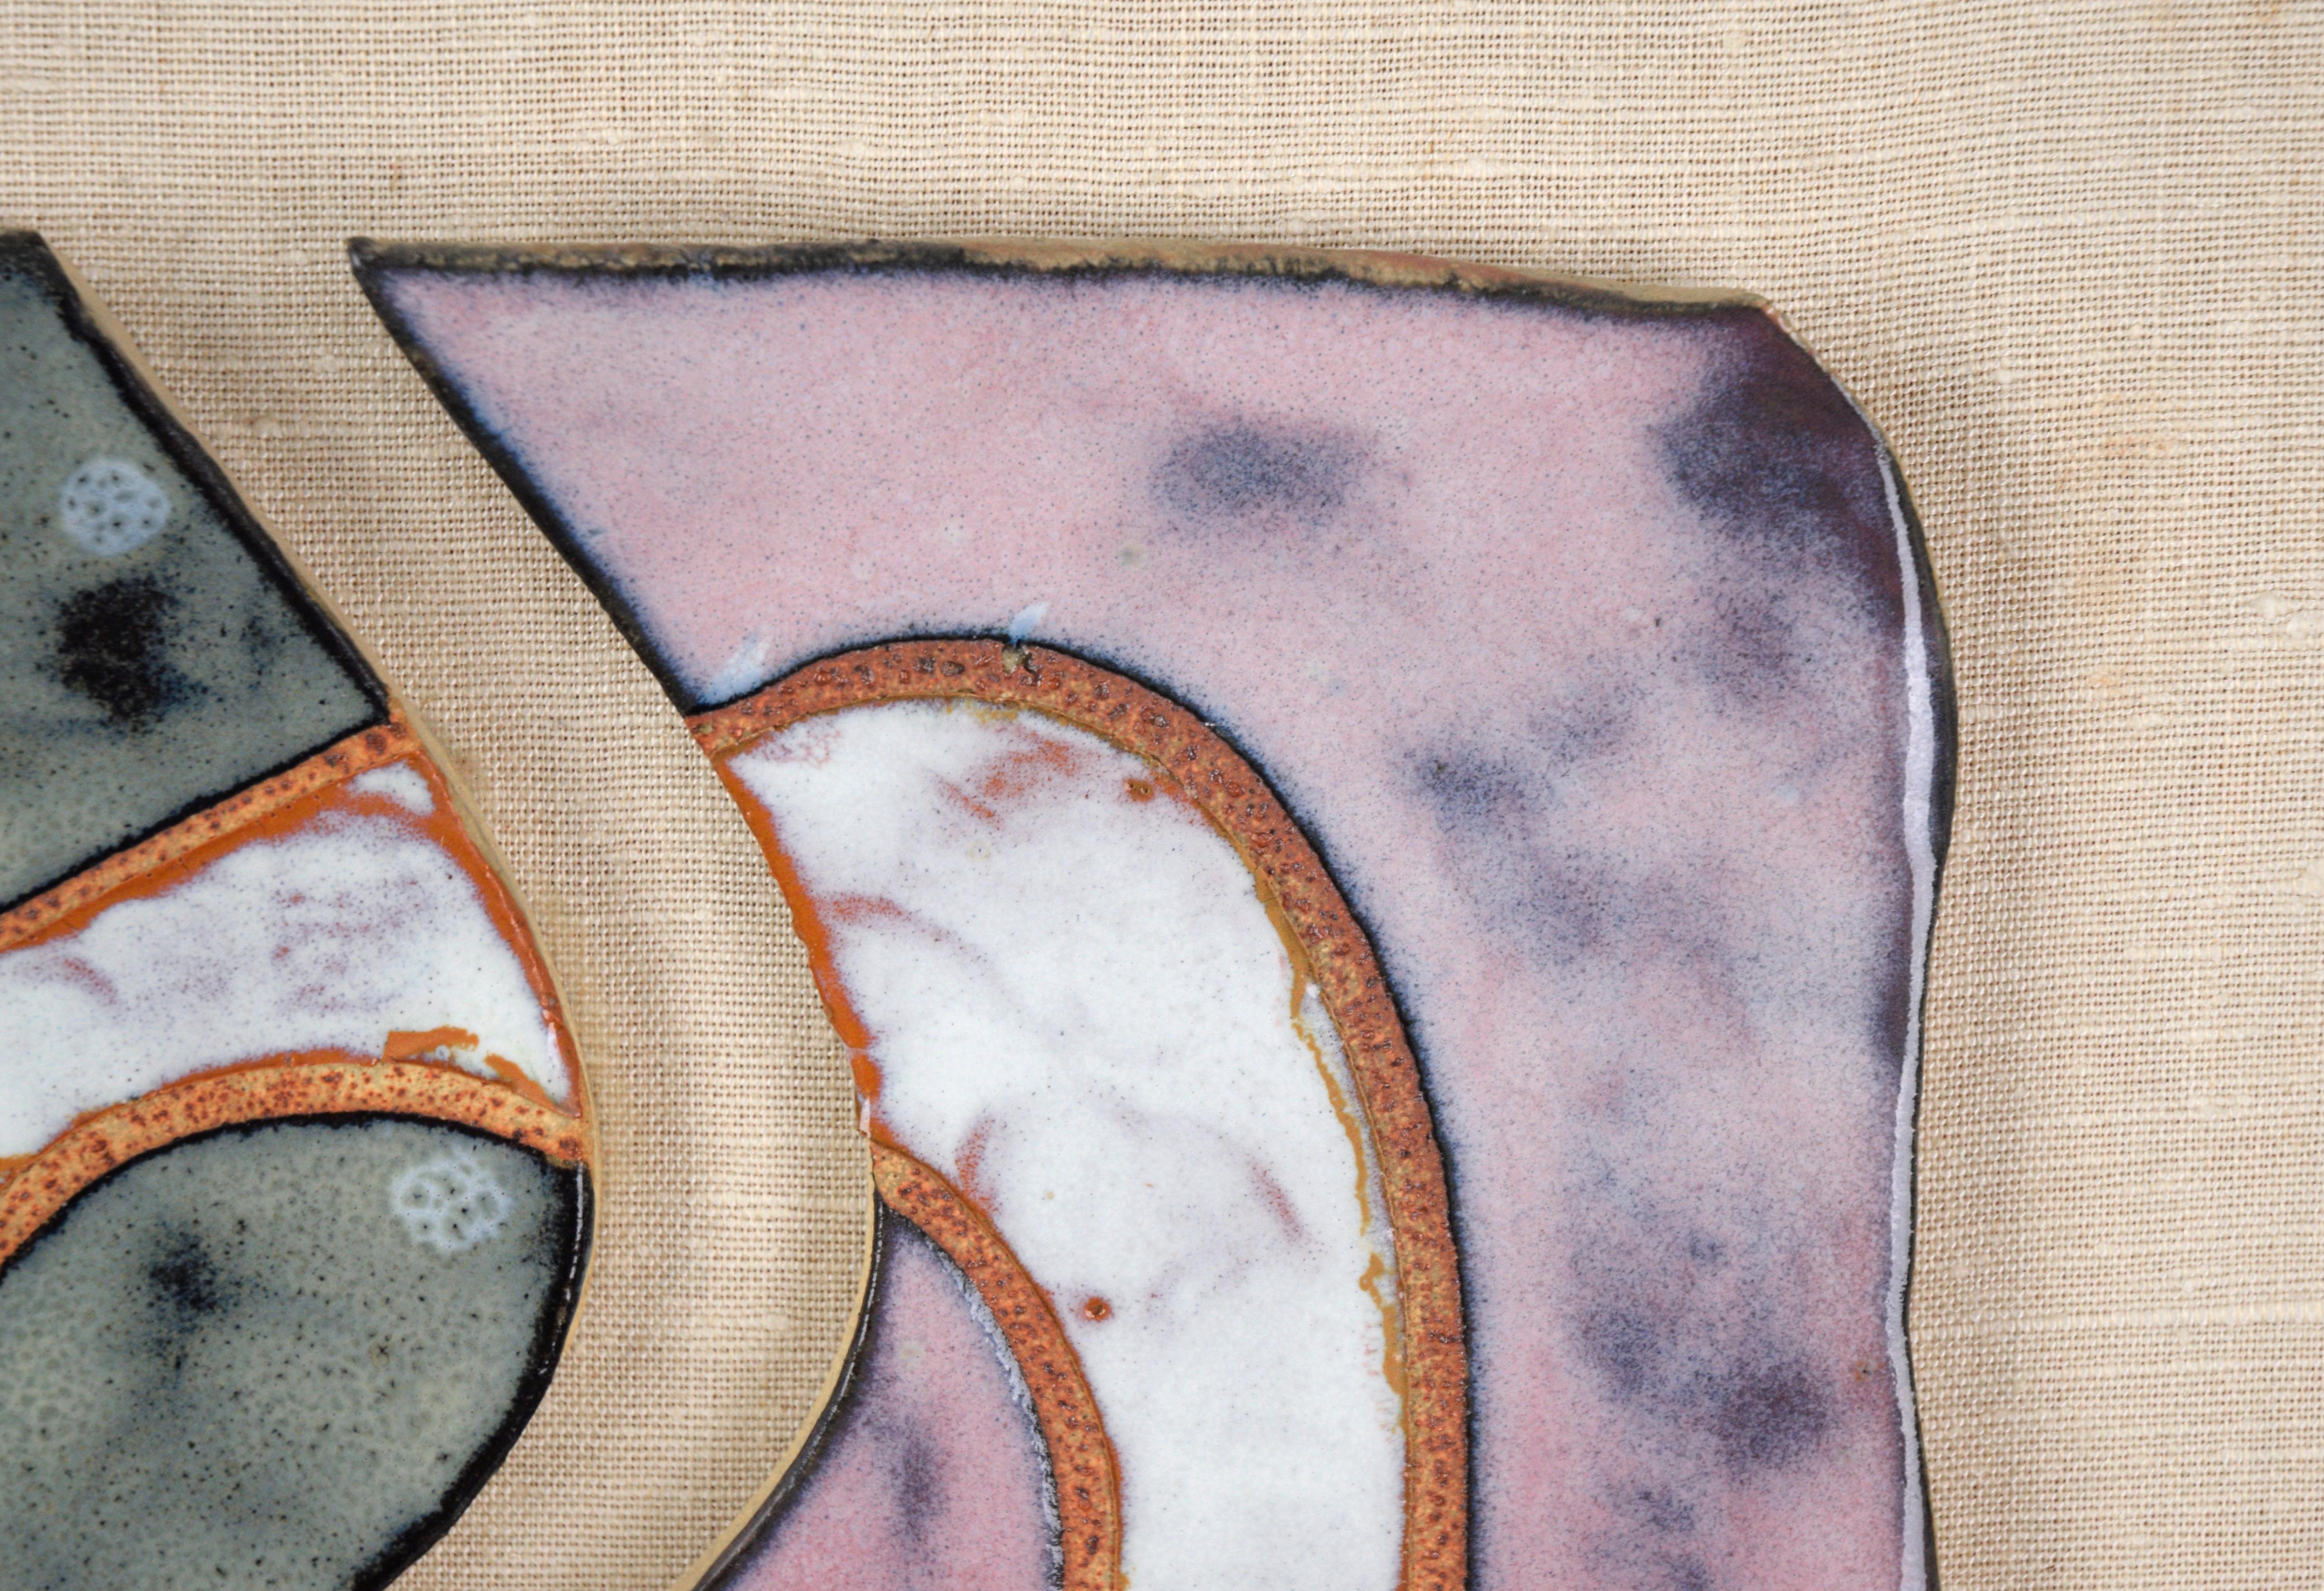 Balanced sculptural composition by an unknown artist. Two pieces of a clay sculpture have been glazed in green and pink, with a white shape stretching across them. The pieces are mounted on a wood panel that has been wrapped in linen.

Panel size: